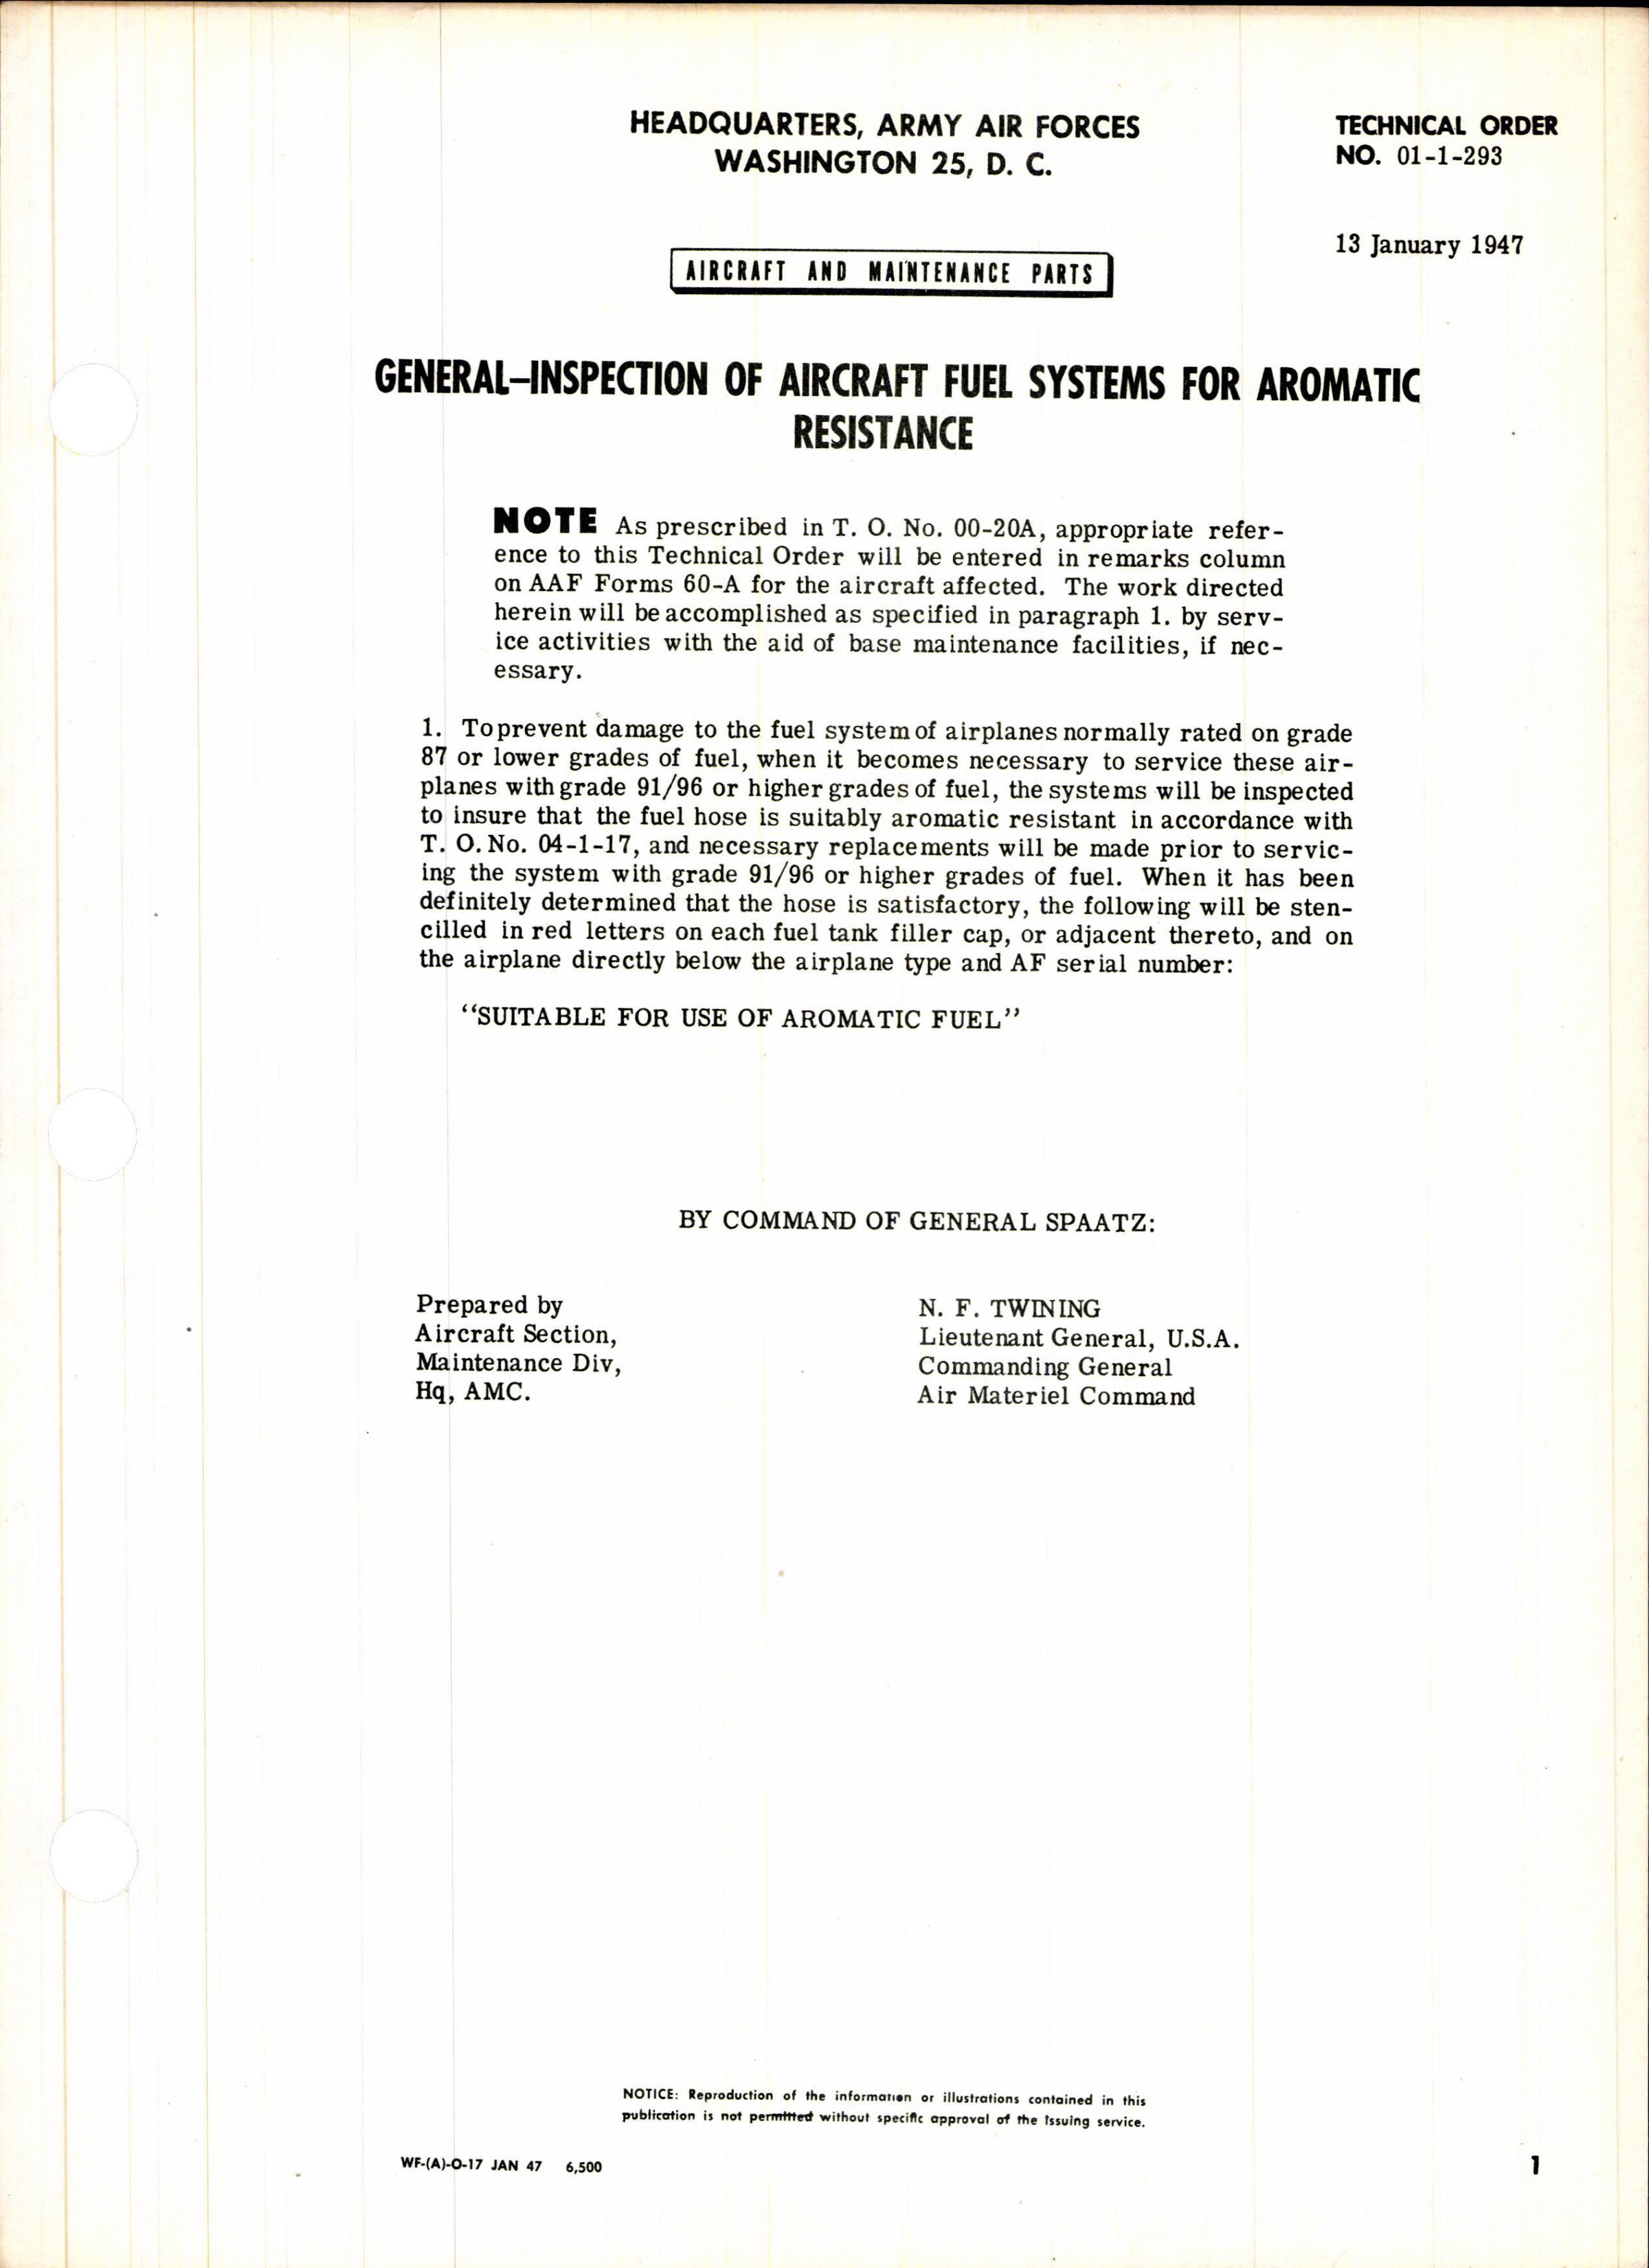 Sample page 1 from AirCorps Library document: Inspection of Aircraft Fuel Systems for Aromatic Resistance